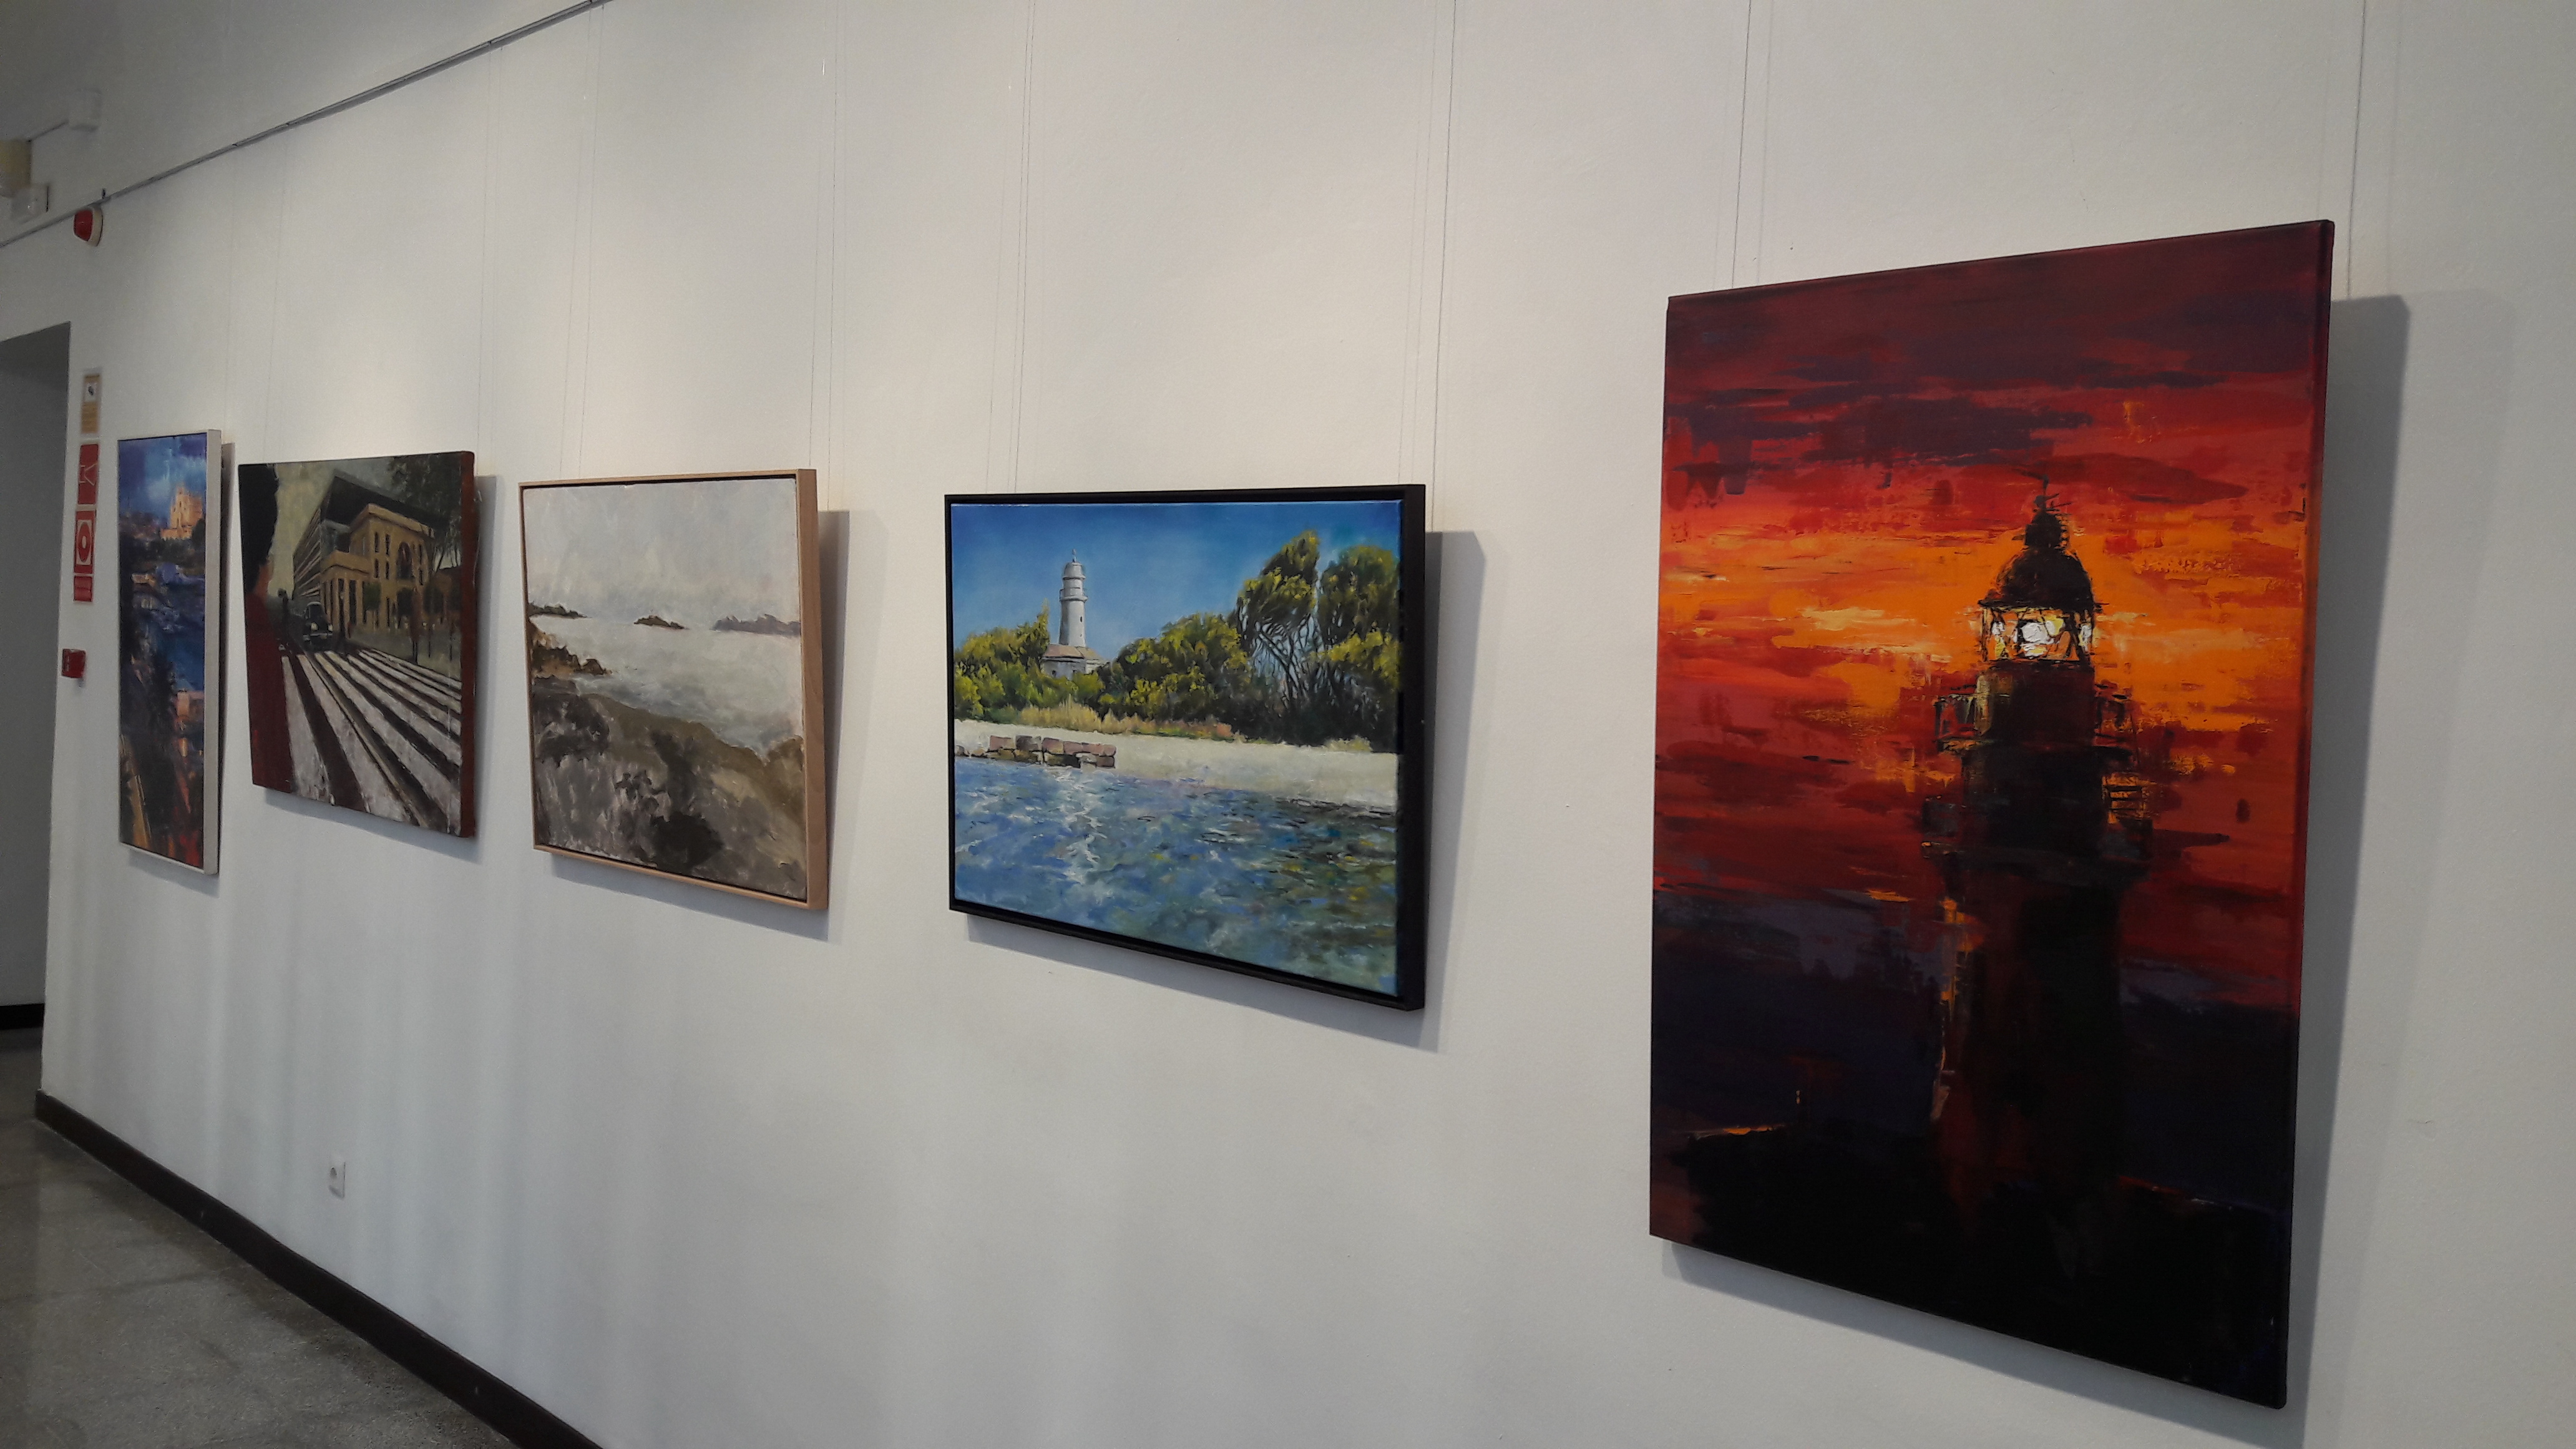 PRIZEWINNERS ARE SELECTED FOR THE APB's 9th PAINTING AND PHOTOGRAPHY CONTEST 